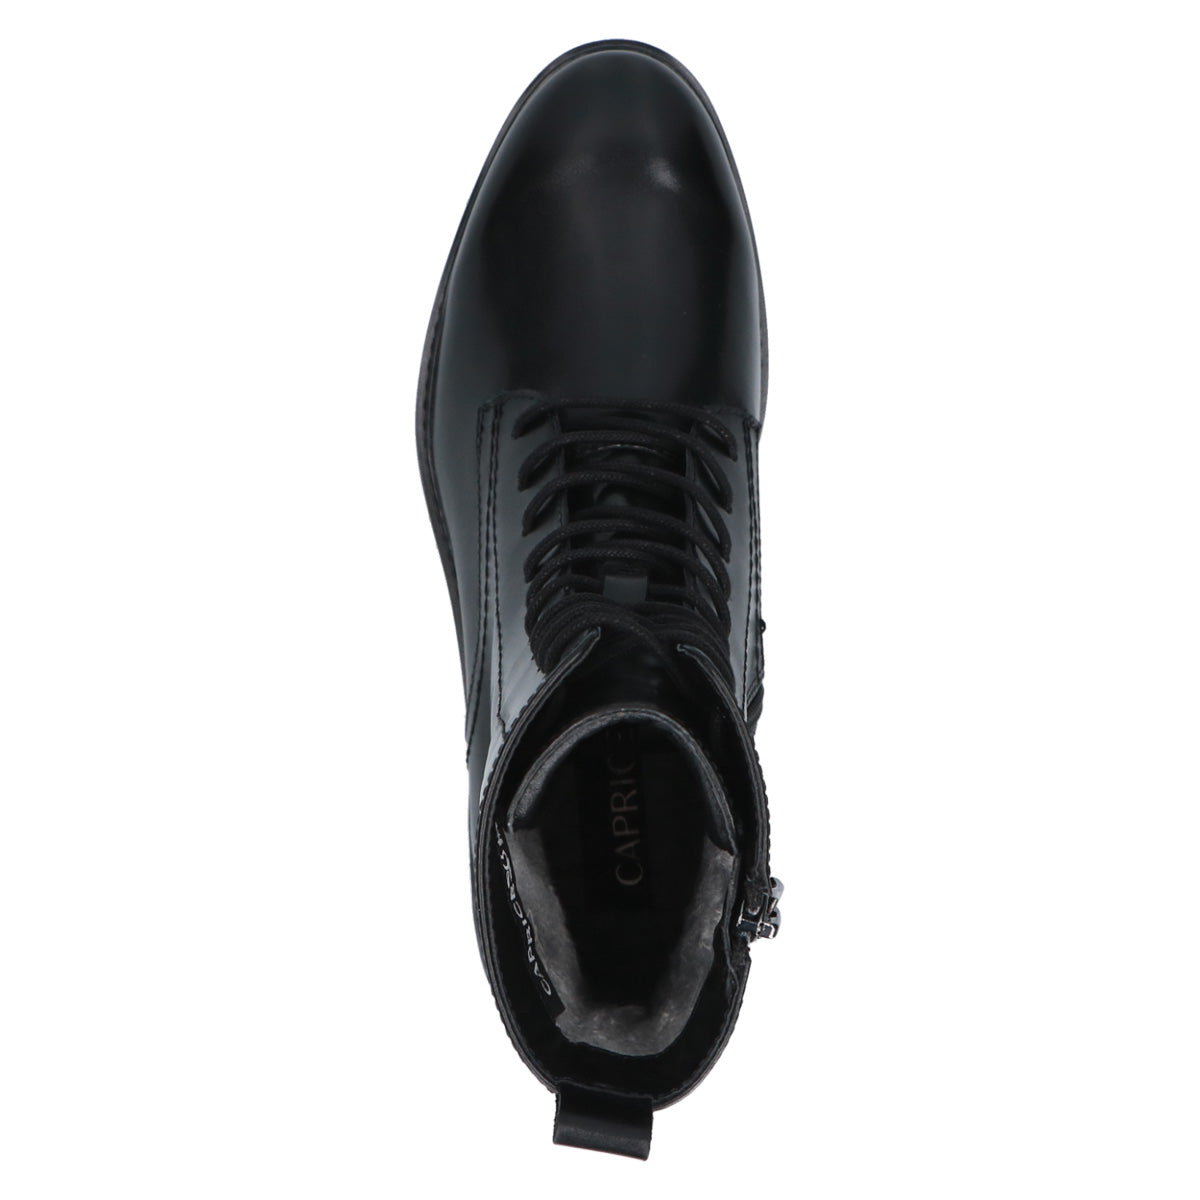 Front view of Caprice Black Leather Boots highlighting the outer zipper.